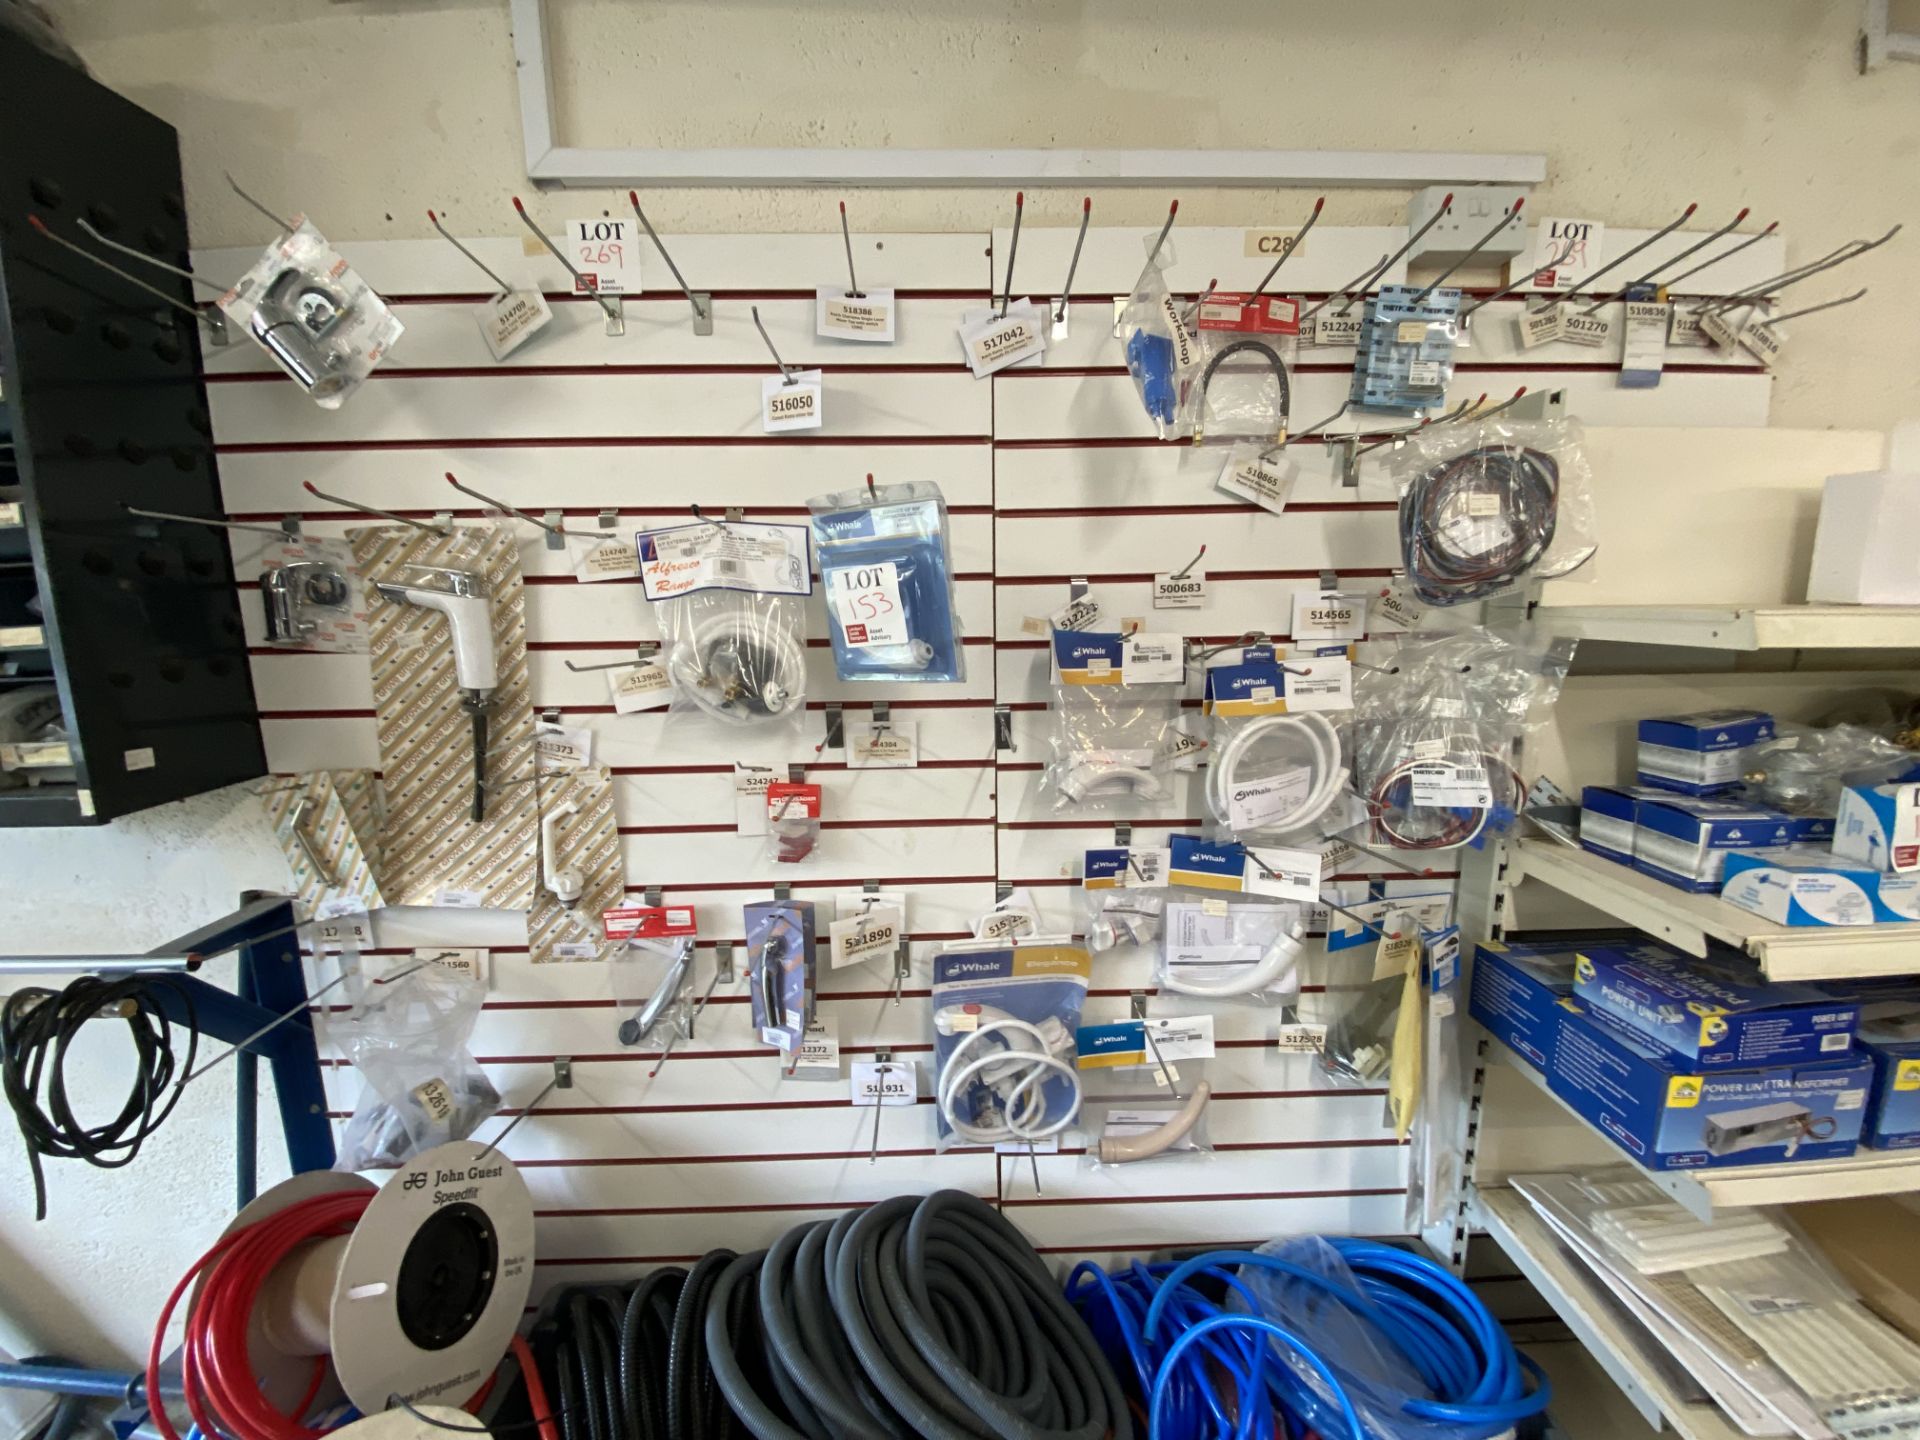 Approx 2.3m of wall mounted shop display hanging rack, excluding contents (please note: to be